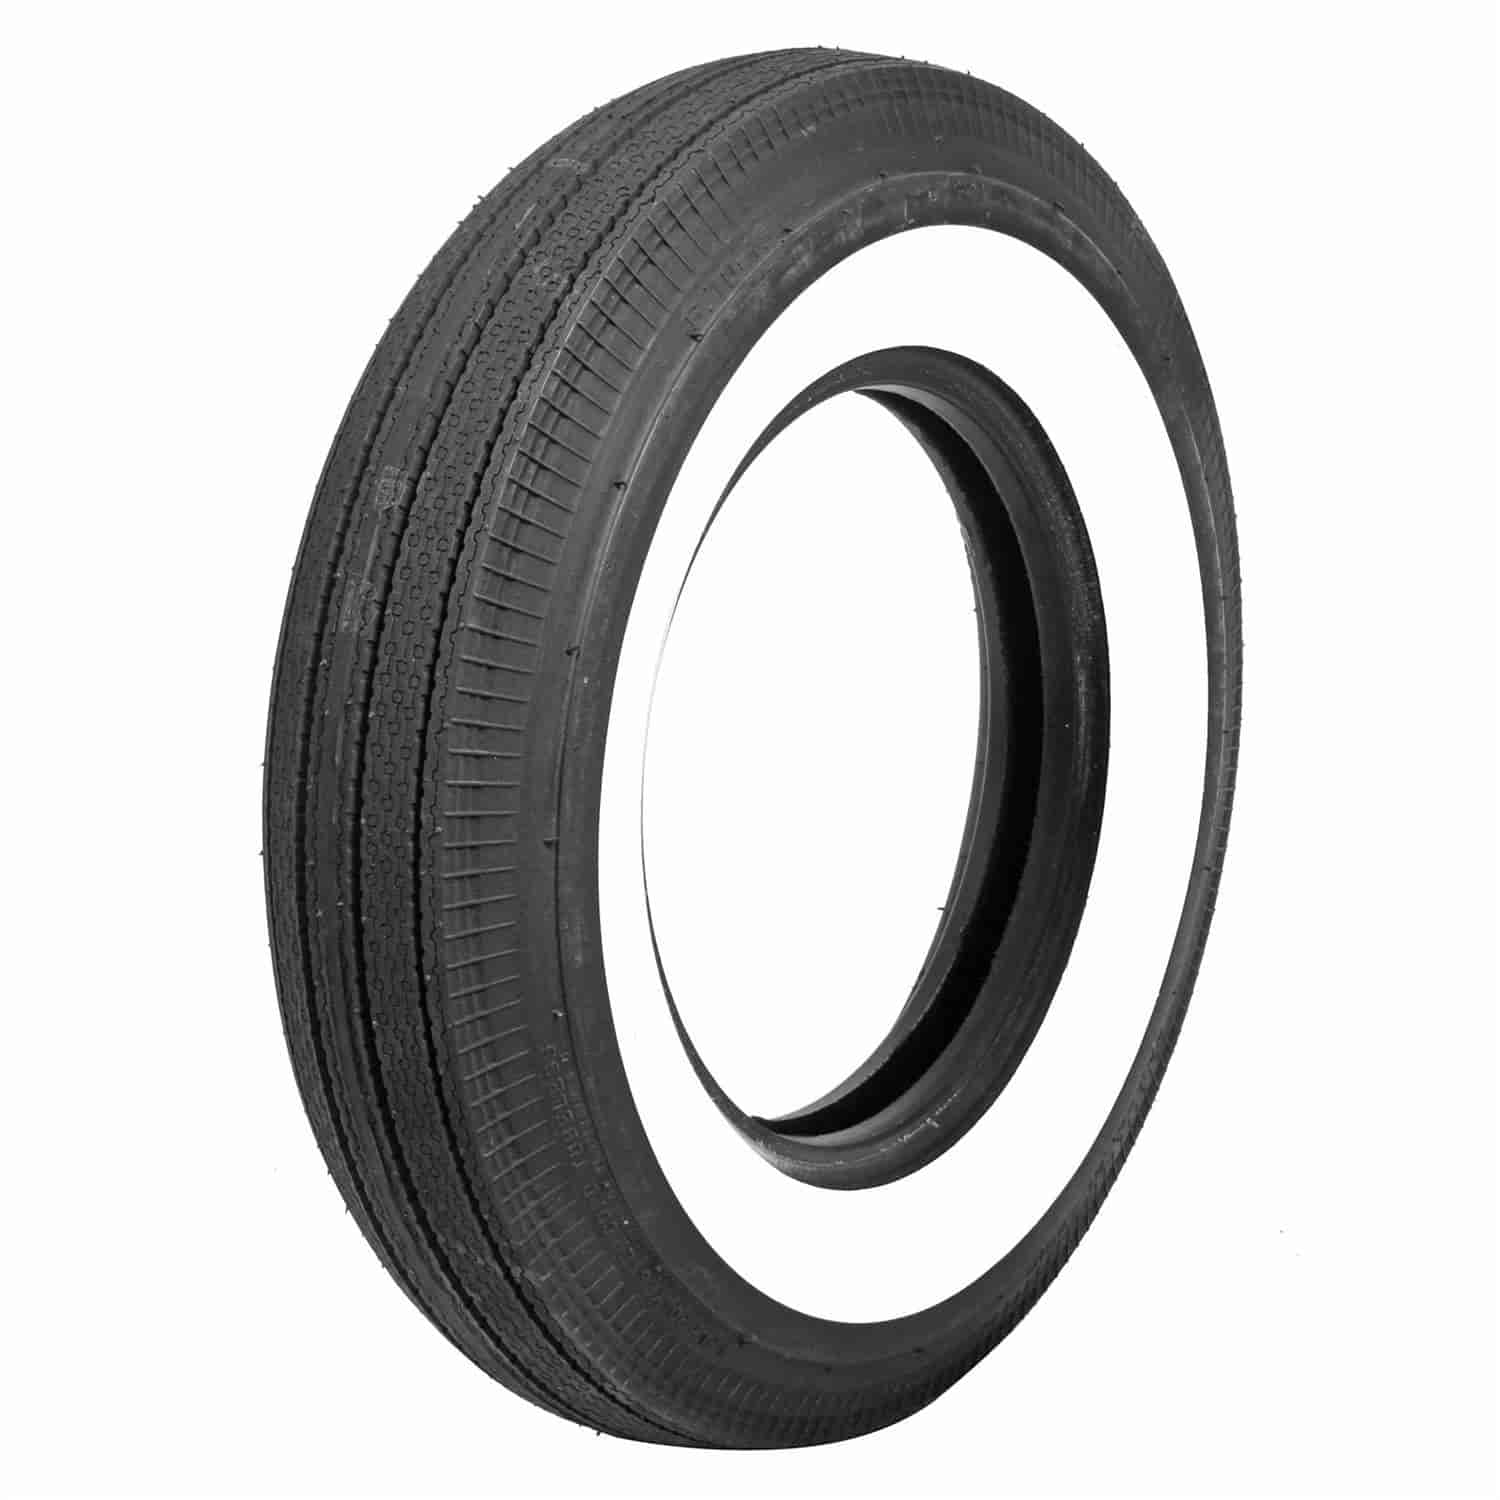 Coker Classic Wide Whitewall Bias Ply Tire 800-15 ( 4.7" x 29.10" - 15" )